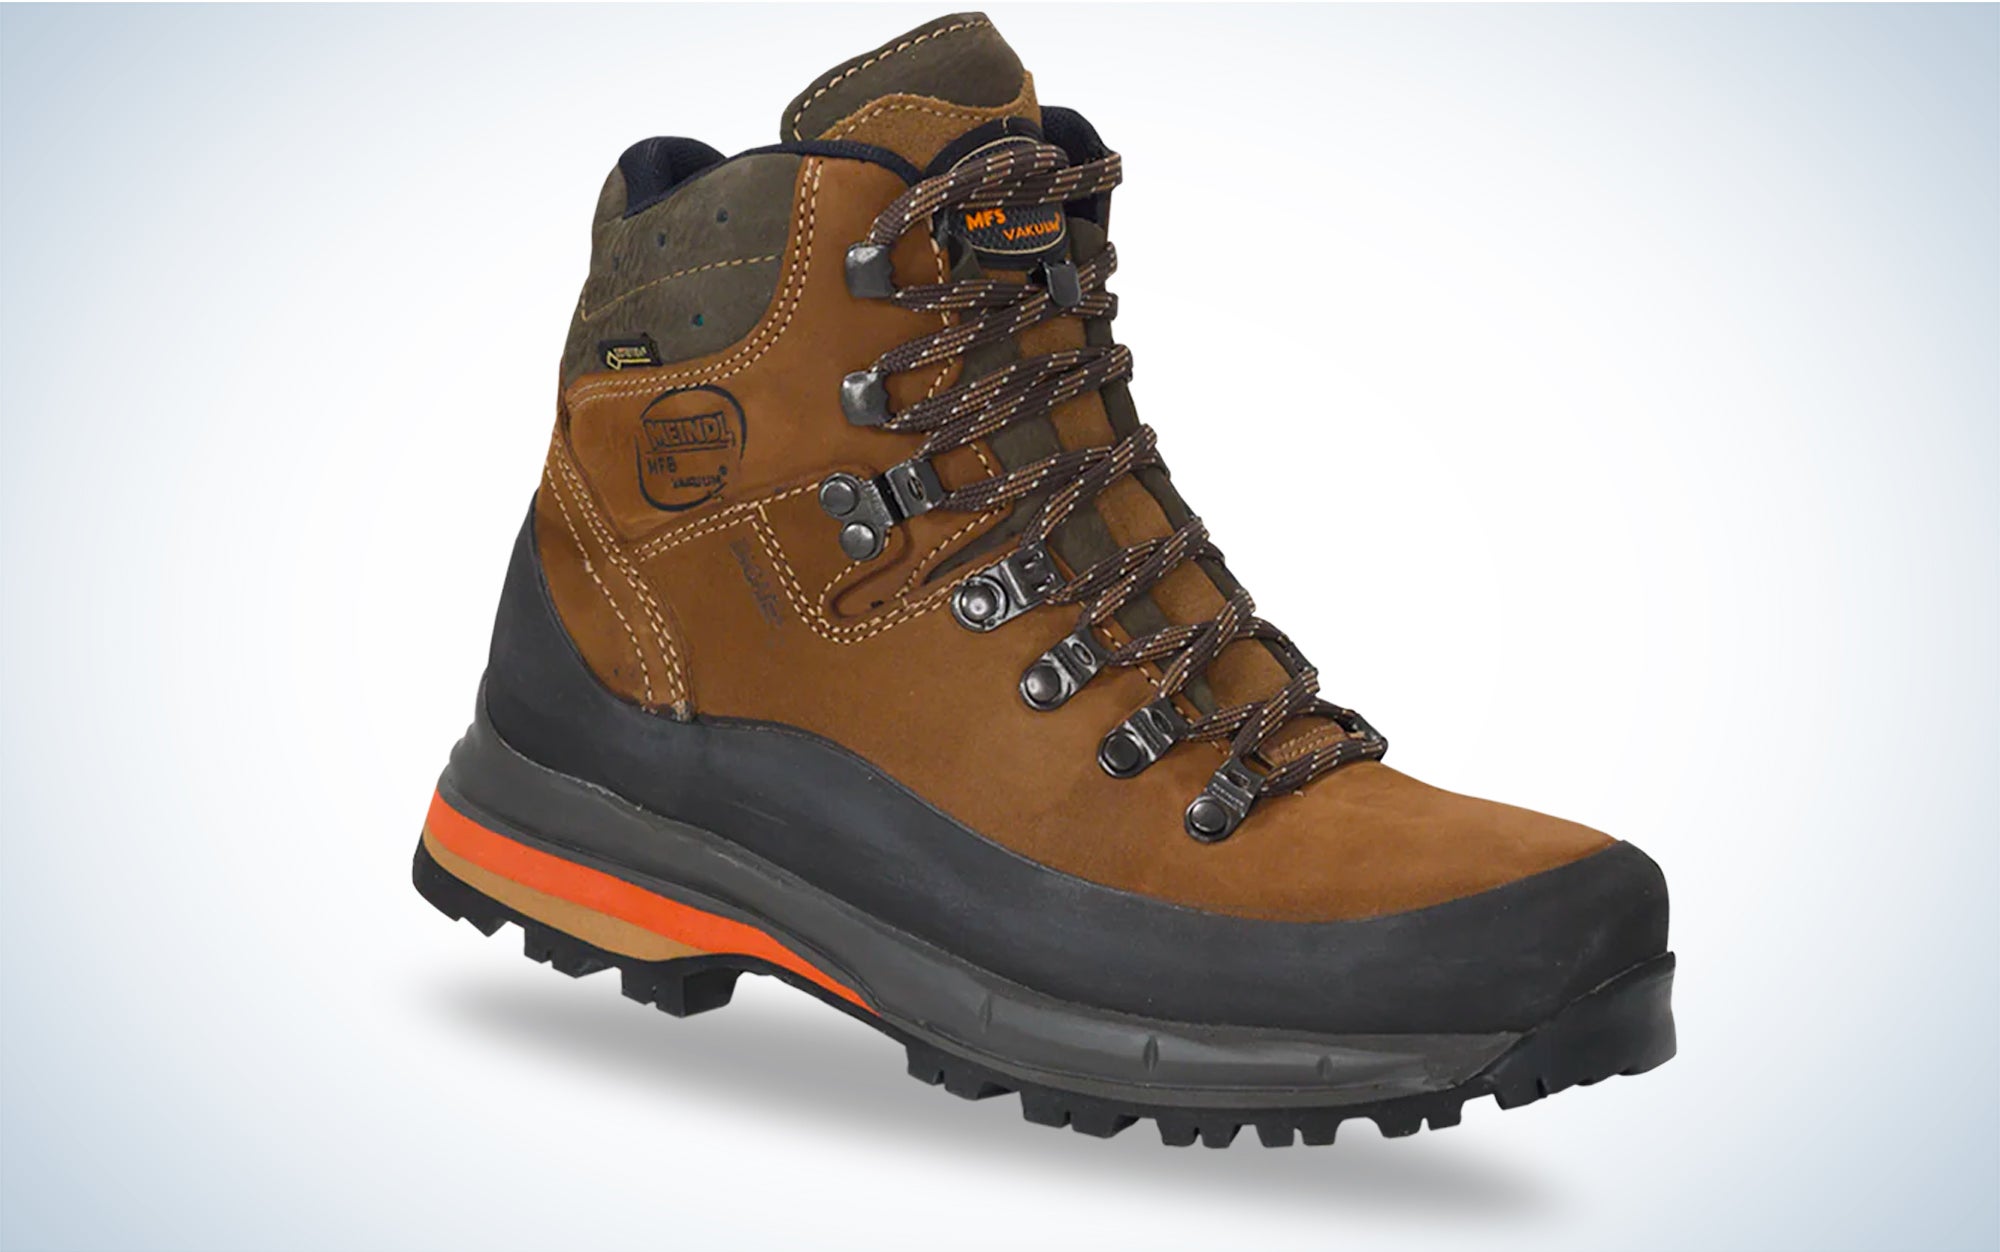 This is a great boot for big mountain hikes and hunts.